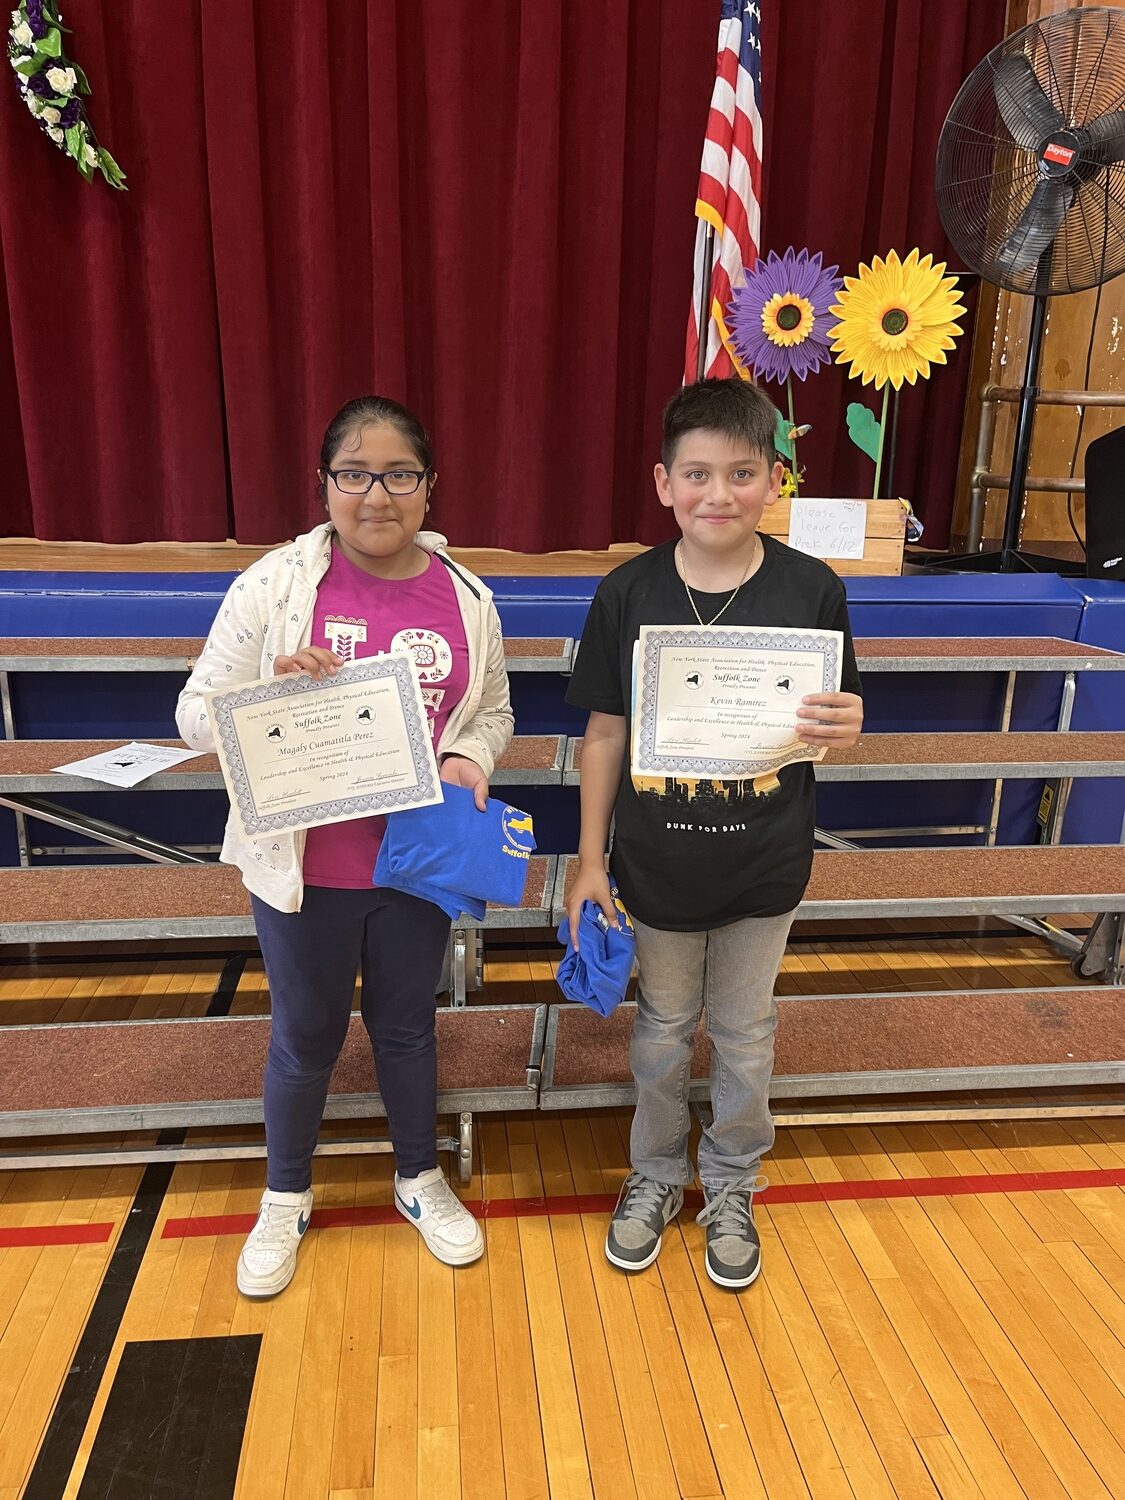 Southampton Elementary School students Magaly Cuamatitla Perez and Kevin Ramirez were recently presented with Student Leadership Awards from the New York State Association for Health, Physical Education, Recreation and Dance. The students earned the recognition for displaying leadership attributes in their physical education classes and being positive role models for their classmates. COURTESY SOUTHAMPTON SCHOOL DISTRICT